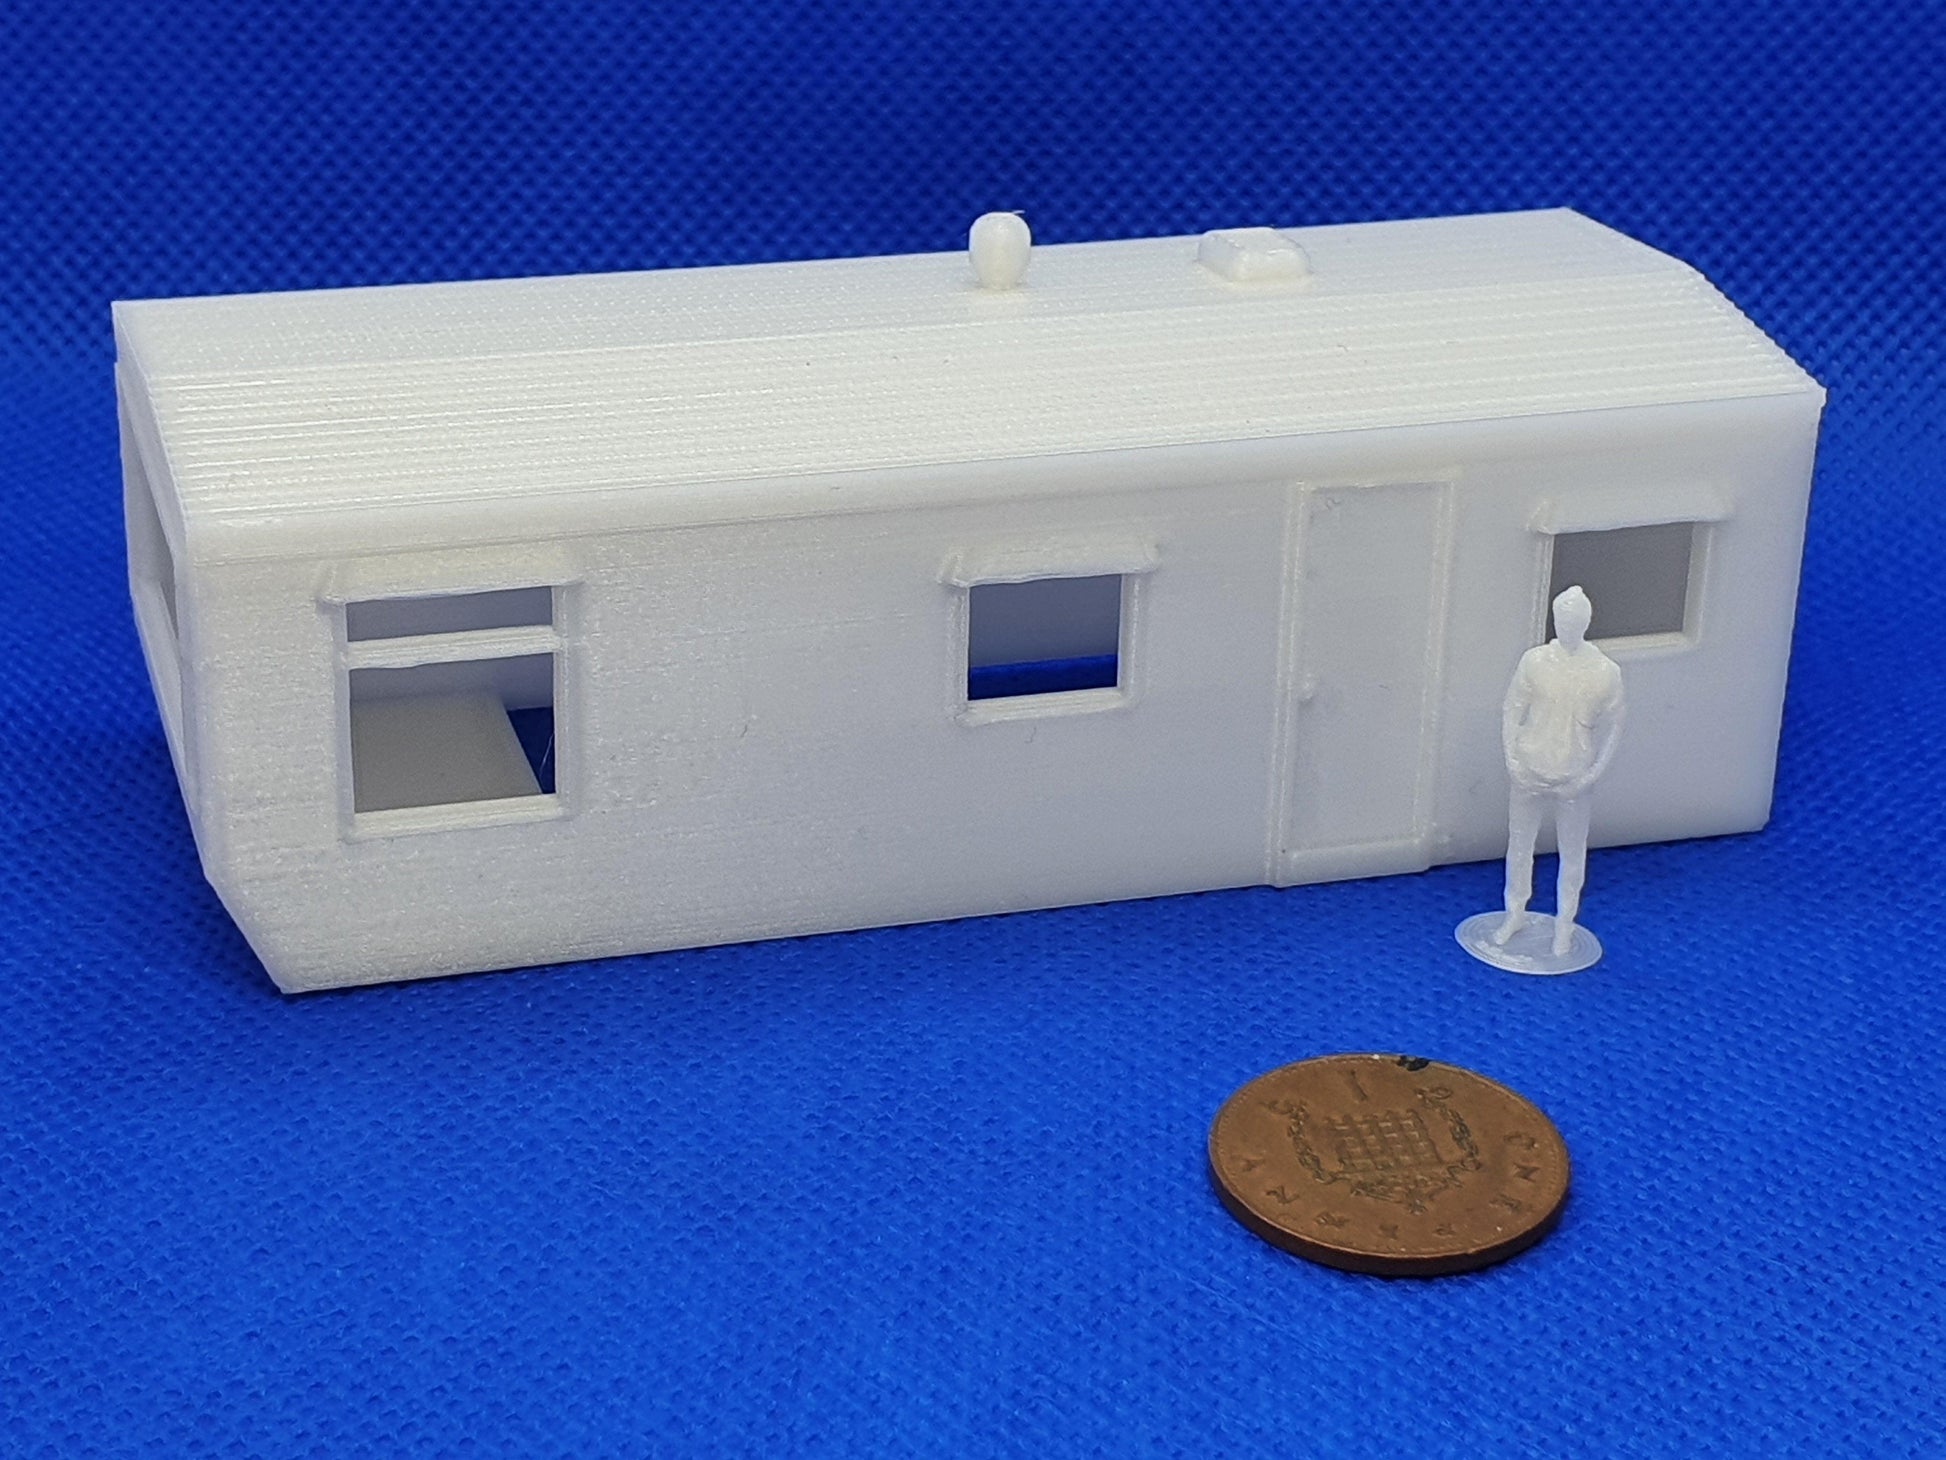 Static caravan OO gauge scale model - body, with person and penny alongside for scale - Three peaks models